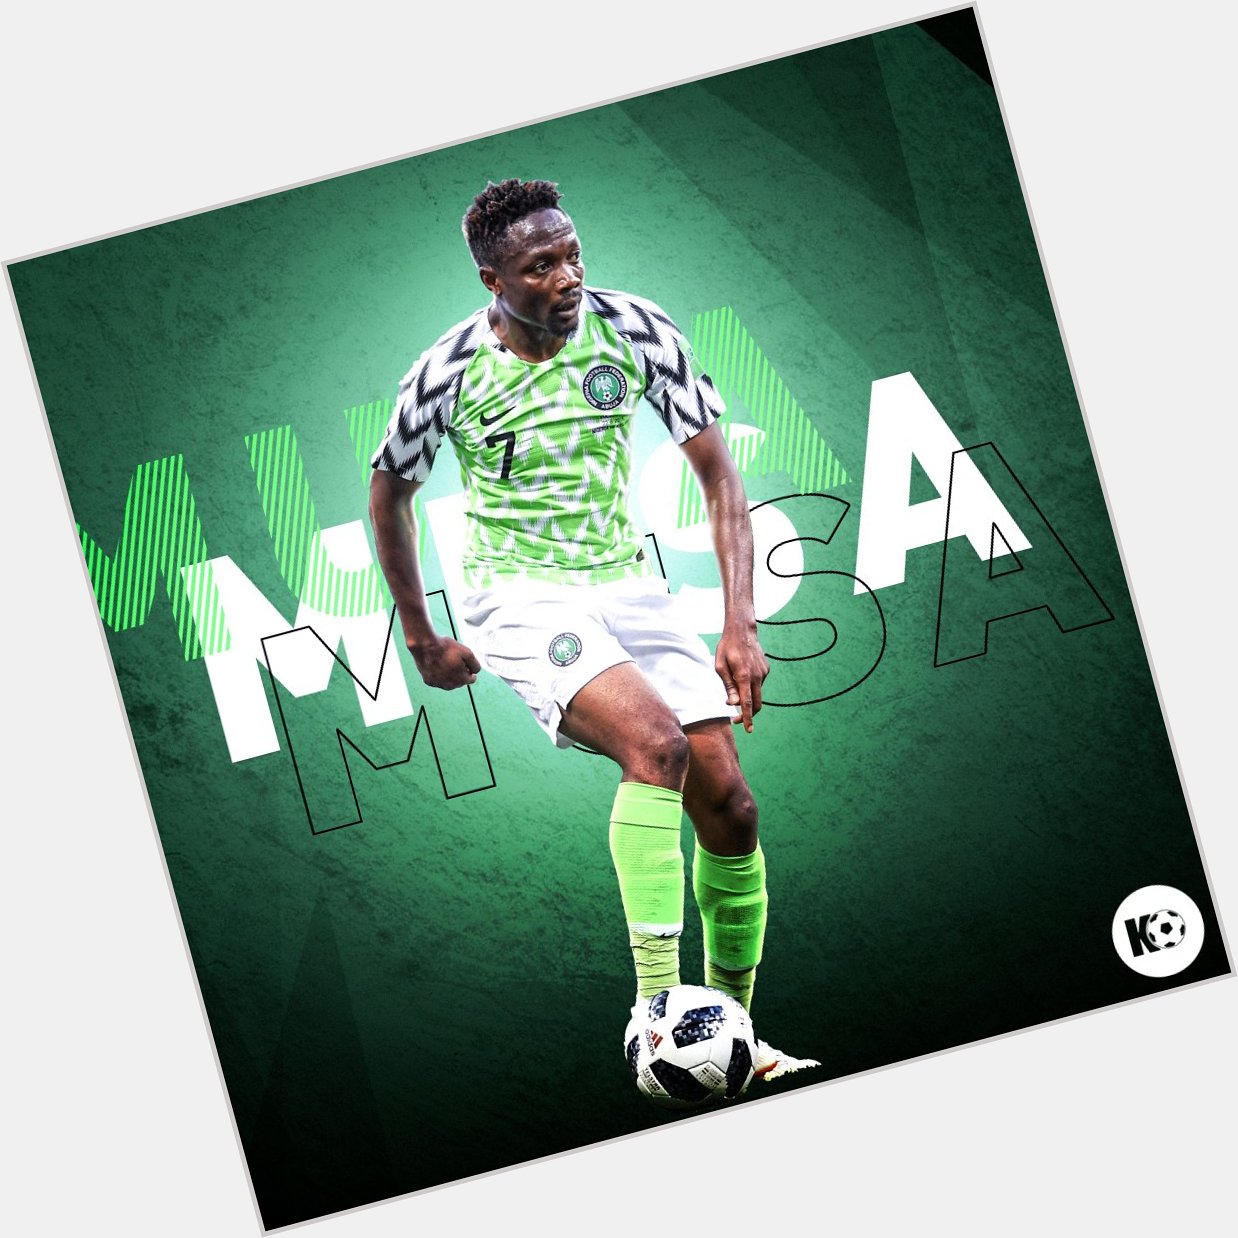 Join in wishing Ahmed Musa a Happy Birthday!  For international football news 